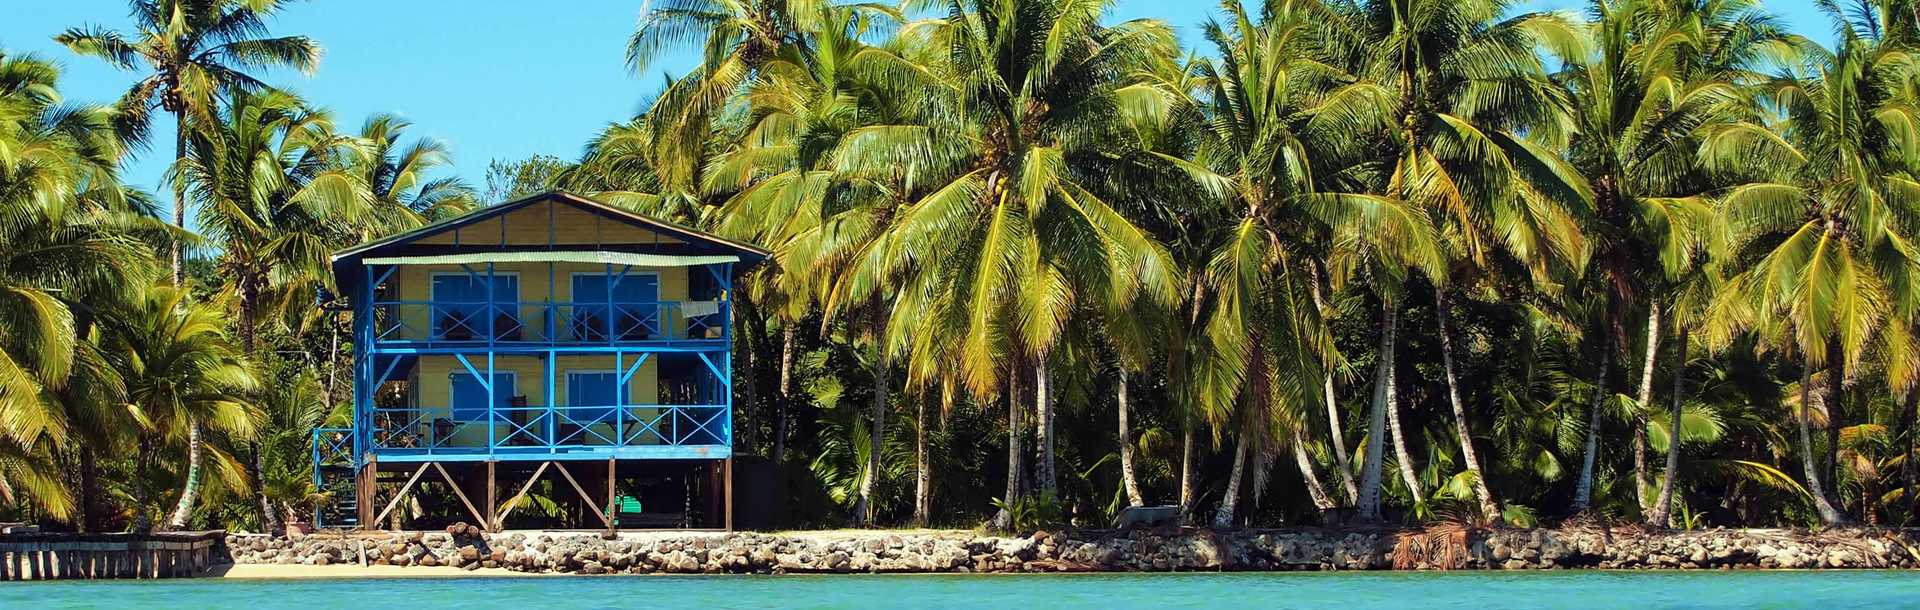 A hotel on the coast in Belize.